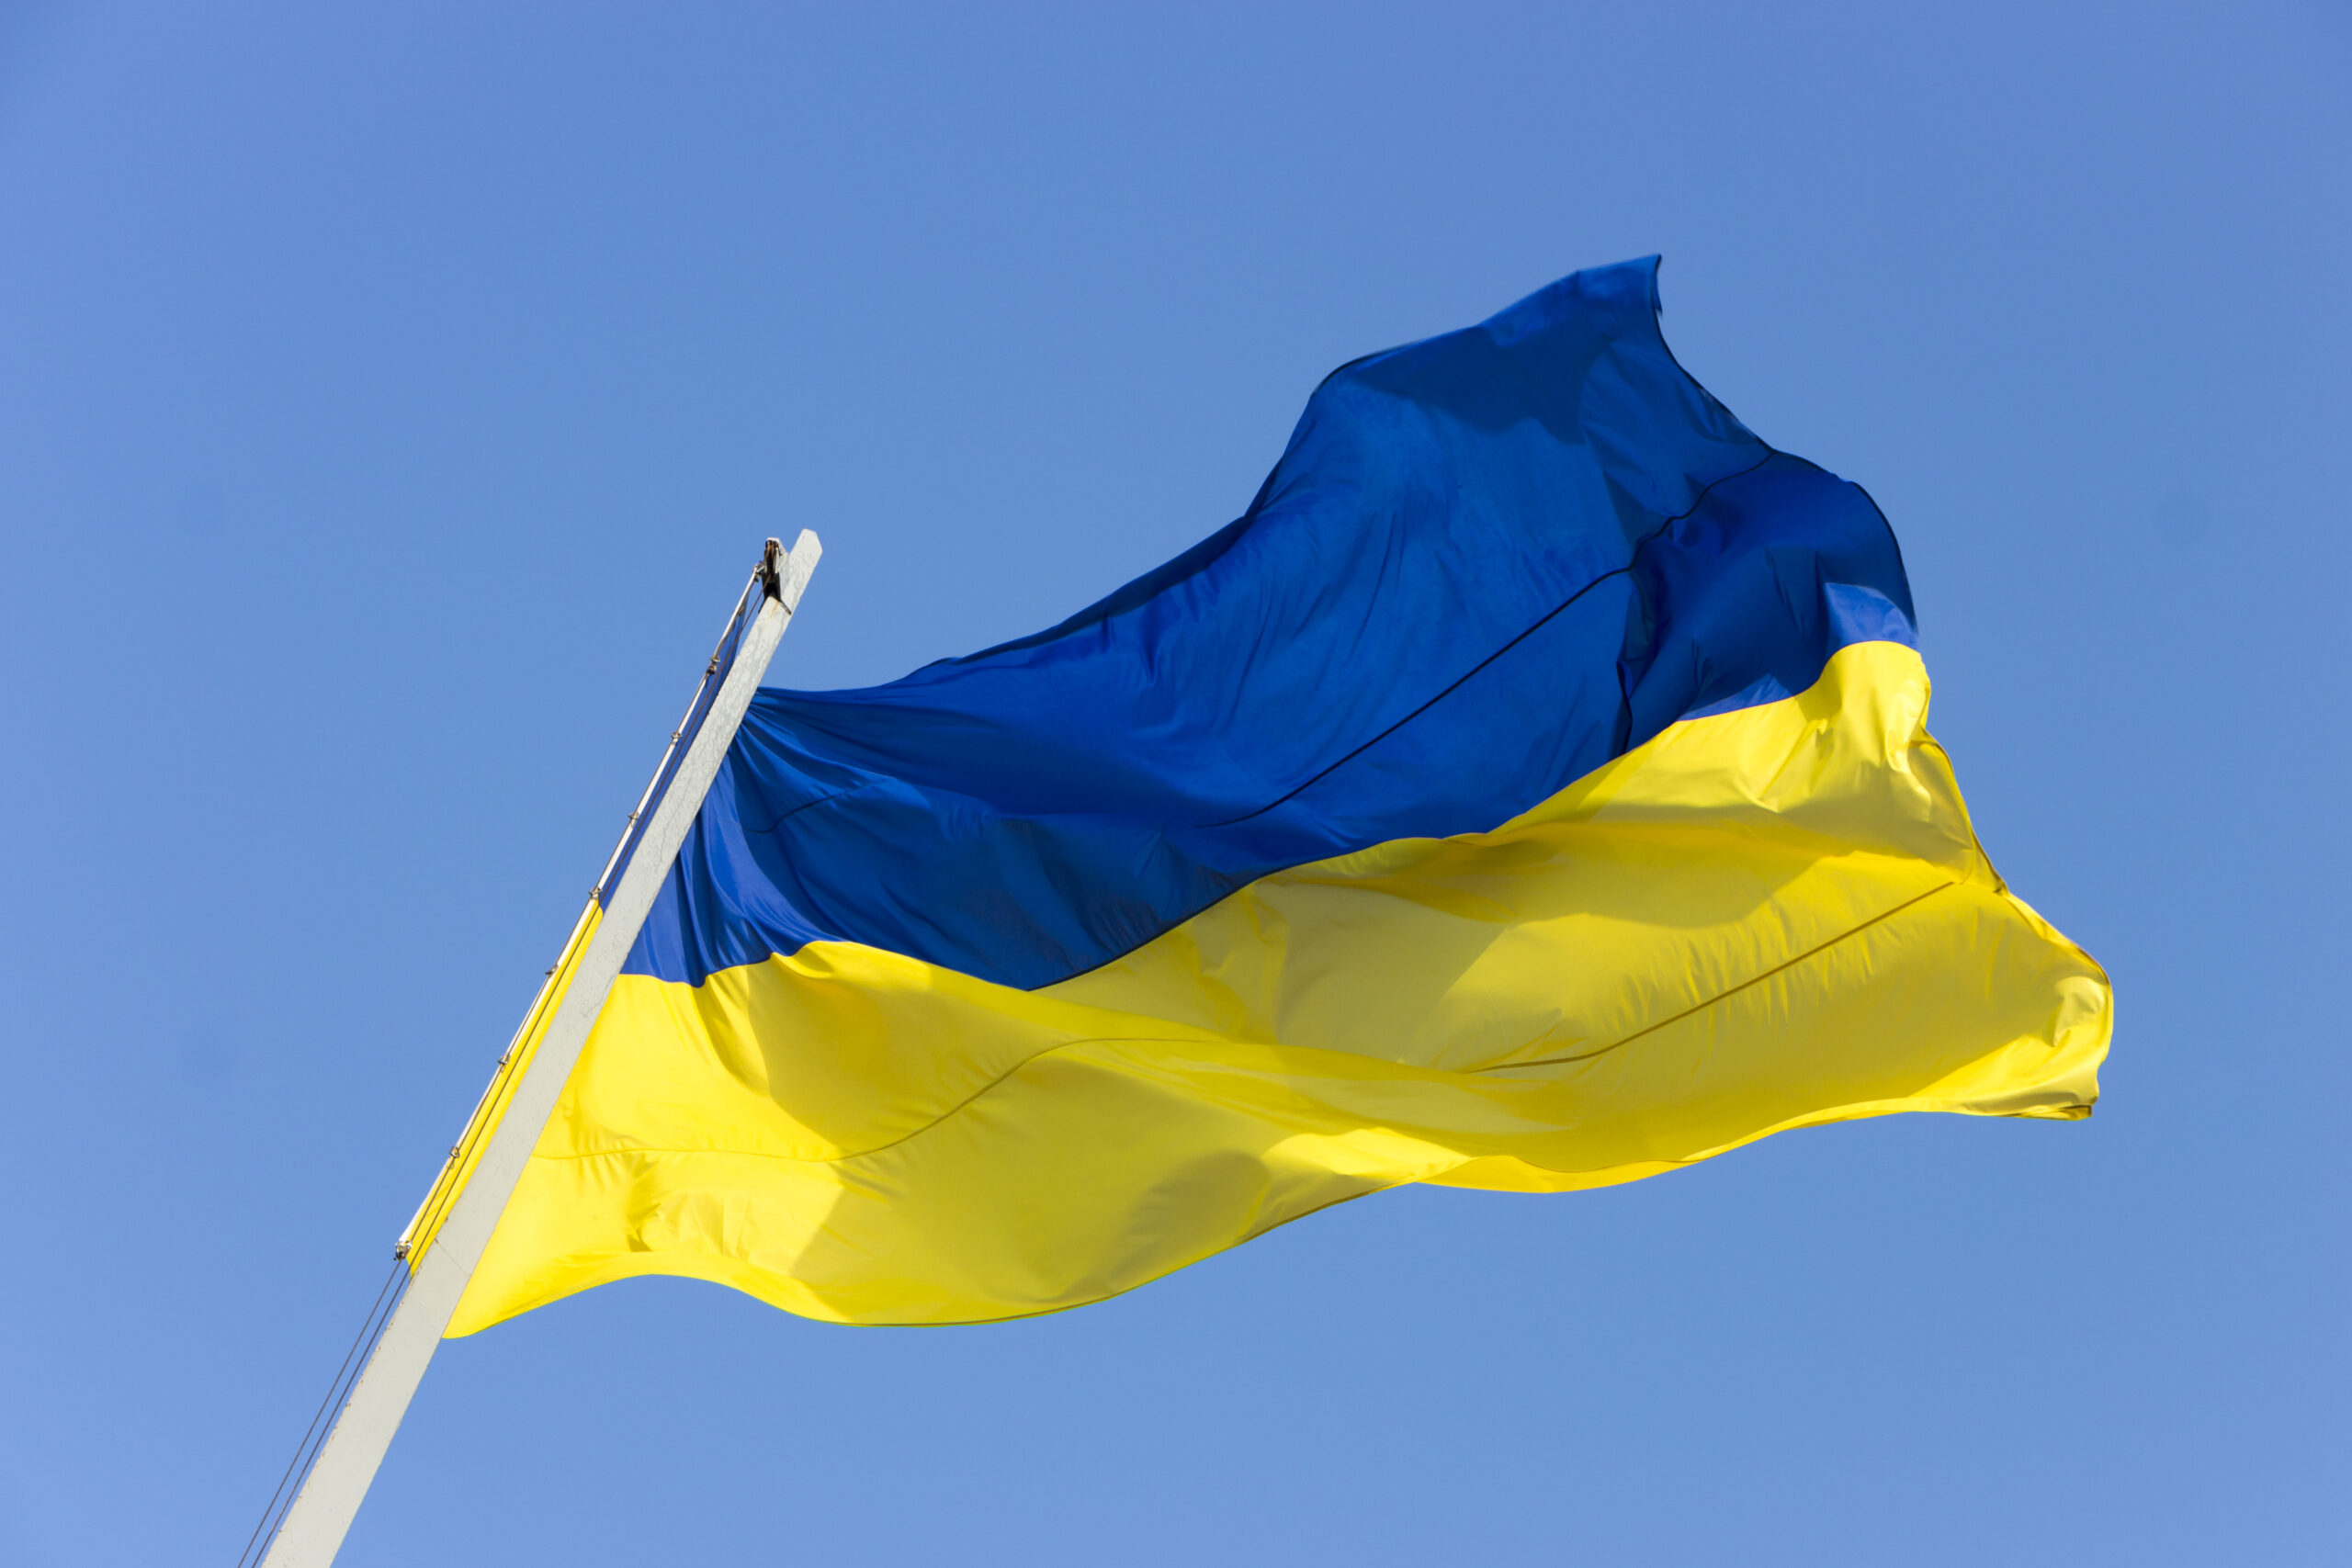 An update on Ukraine-related decisions